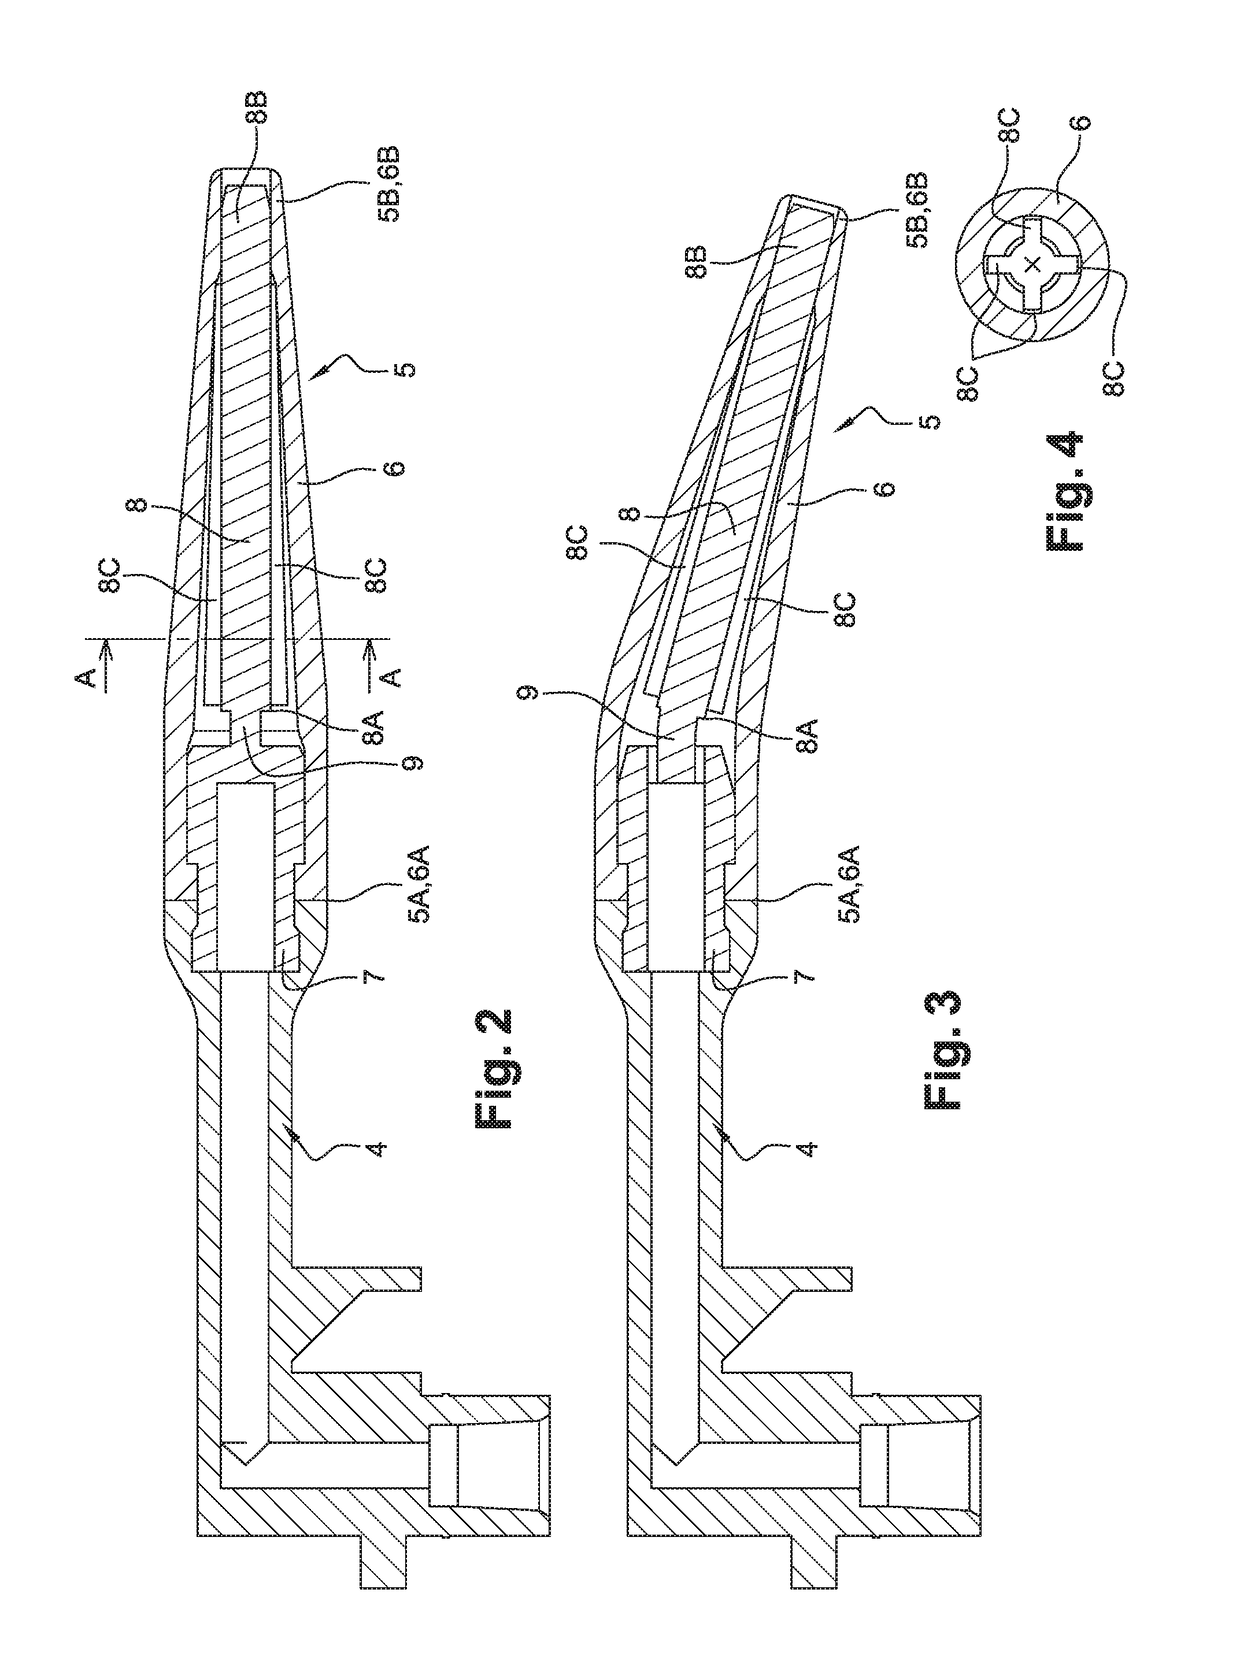 Device for packaging and dispensing fluid, liquid or pasty products